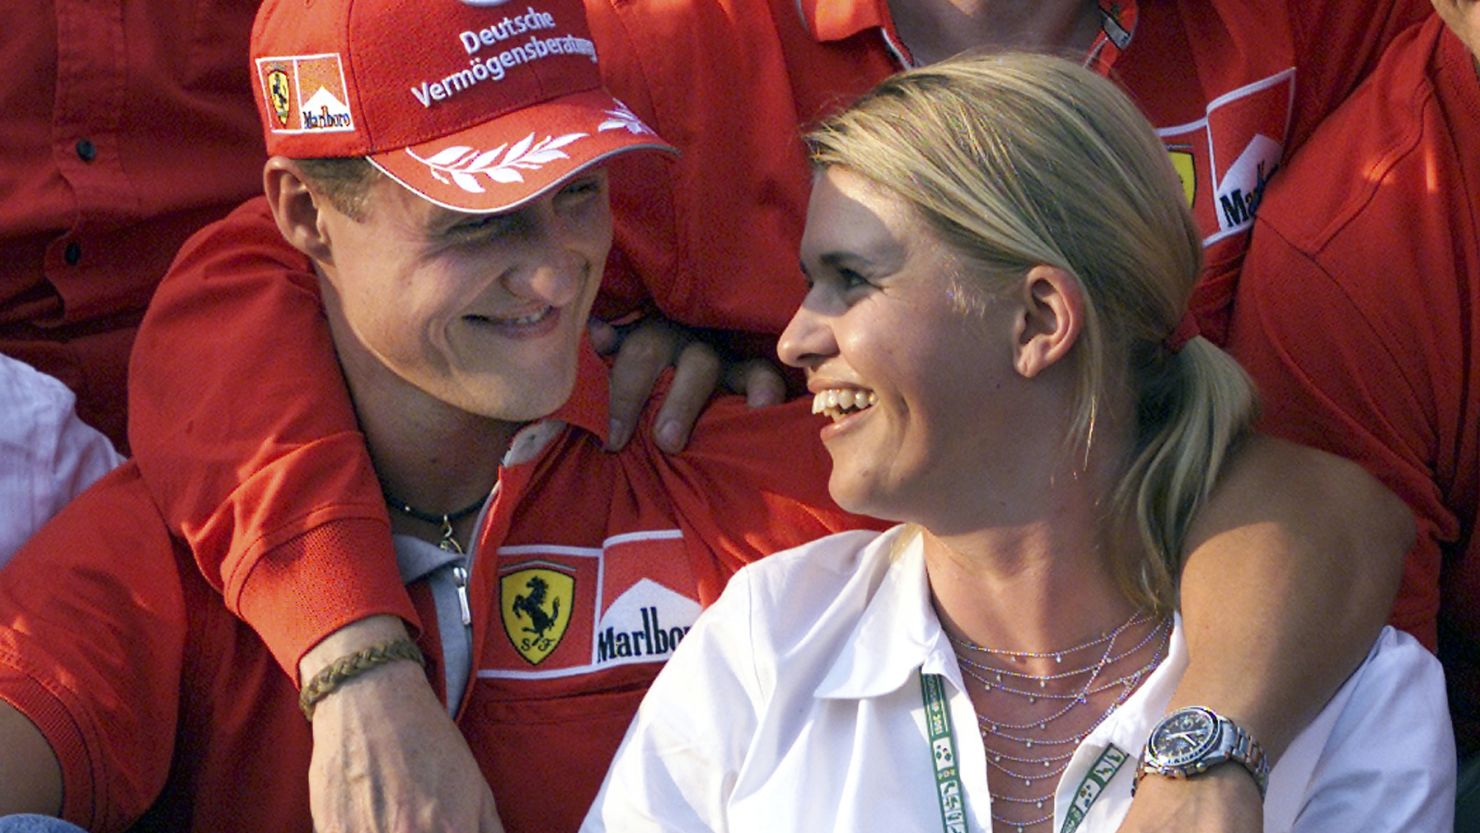 Michael Schumacher and his wife Corinna in happier times at the Grand Prix auto race in Budapest, Hungary, on August 19, 2001. 